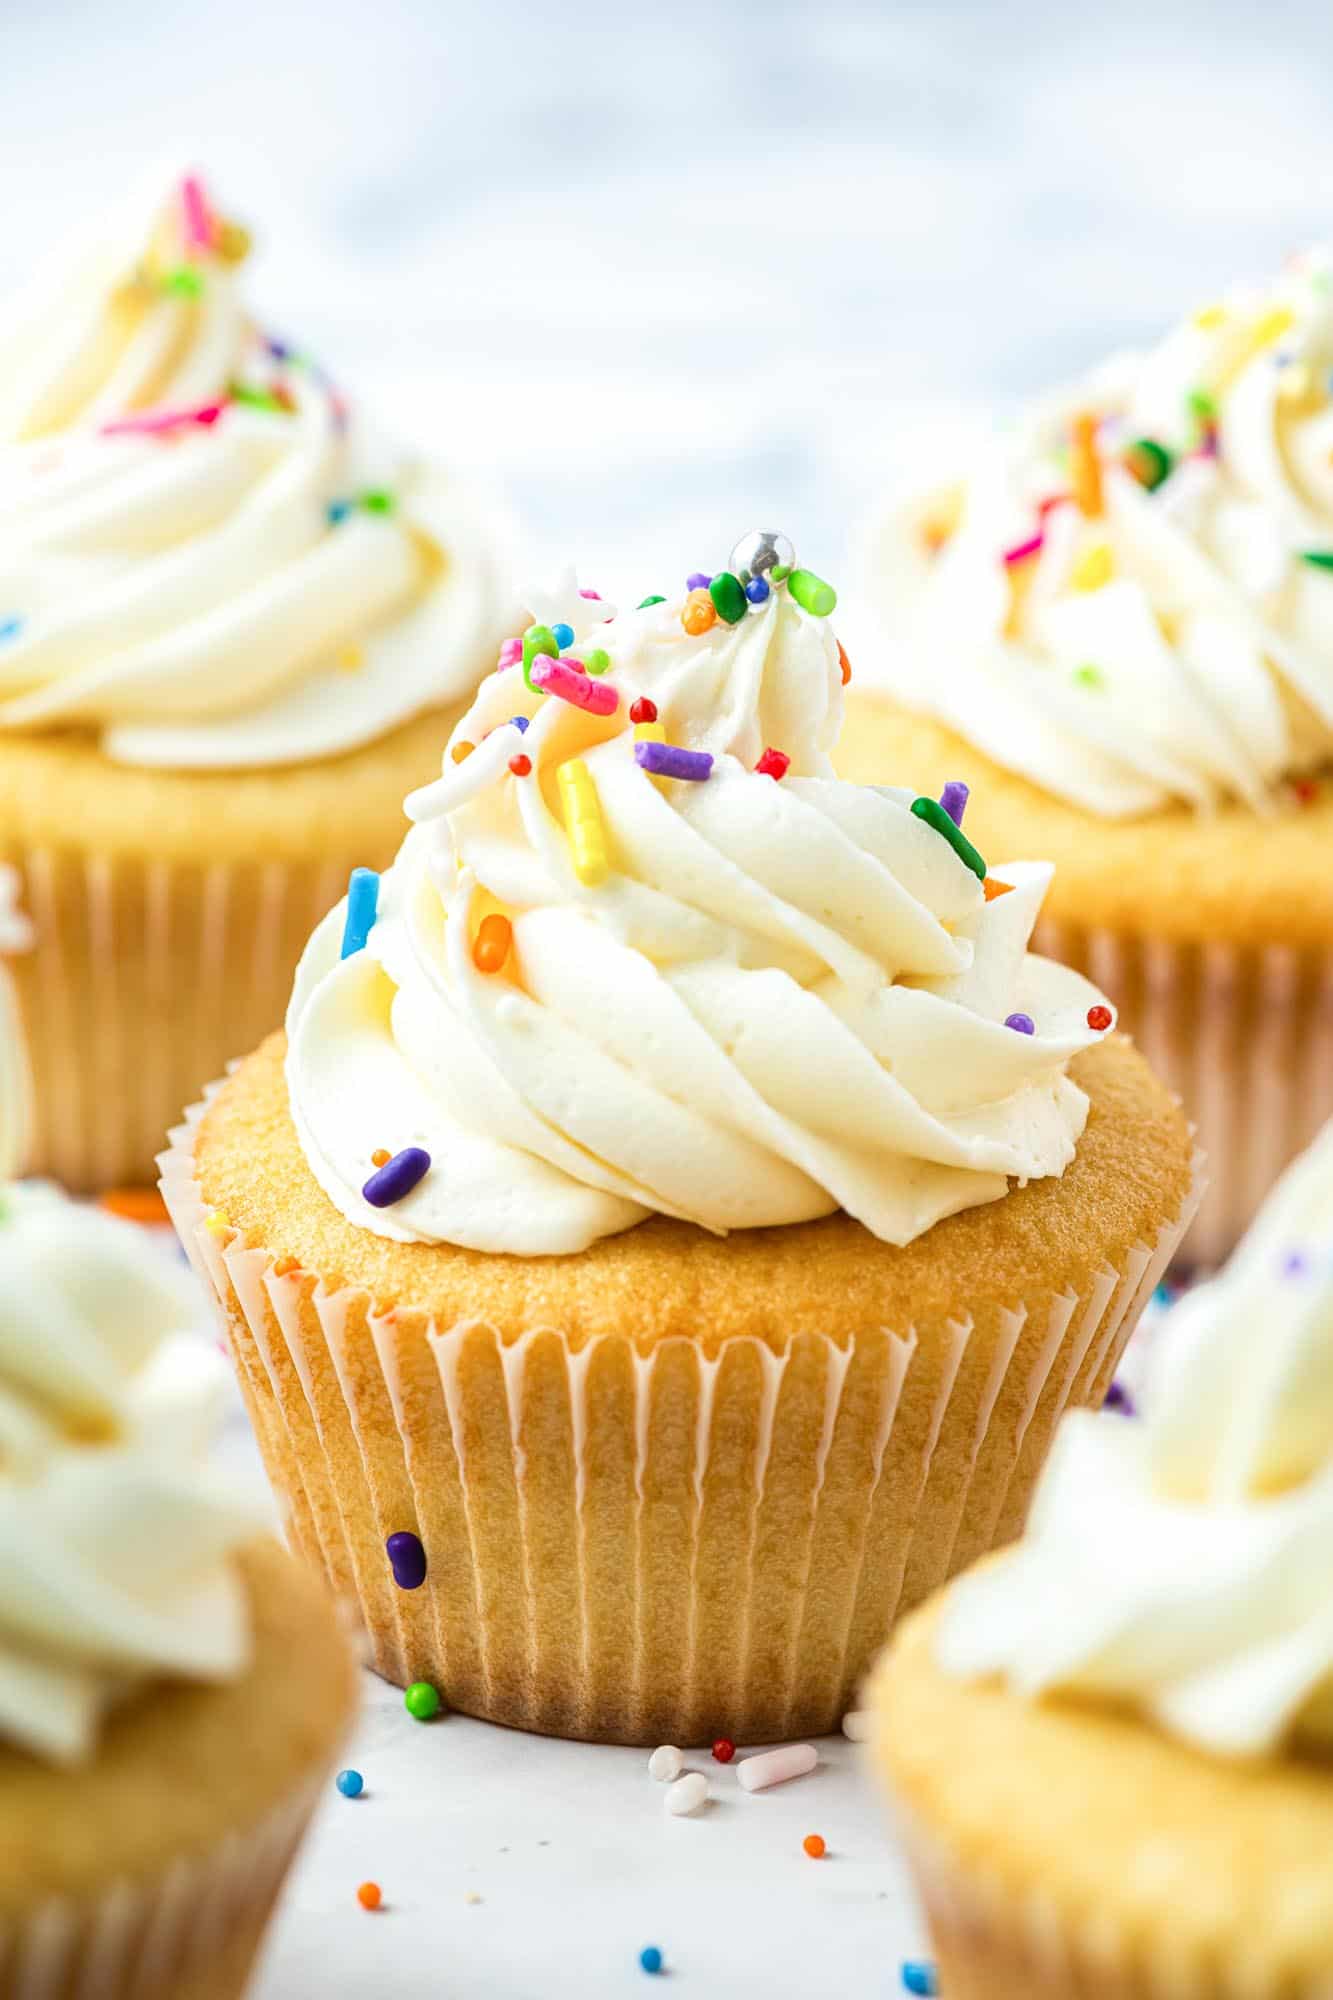 Vanilla cupcakes with sprinkles